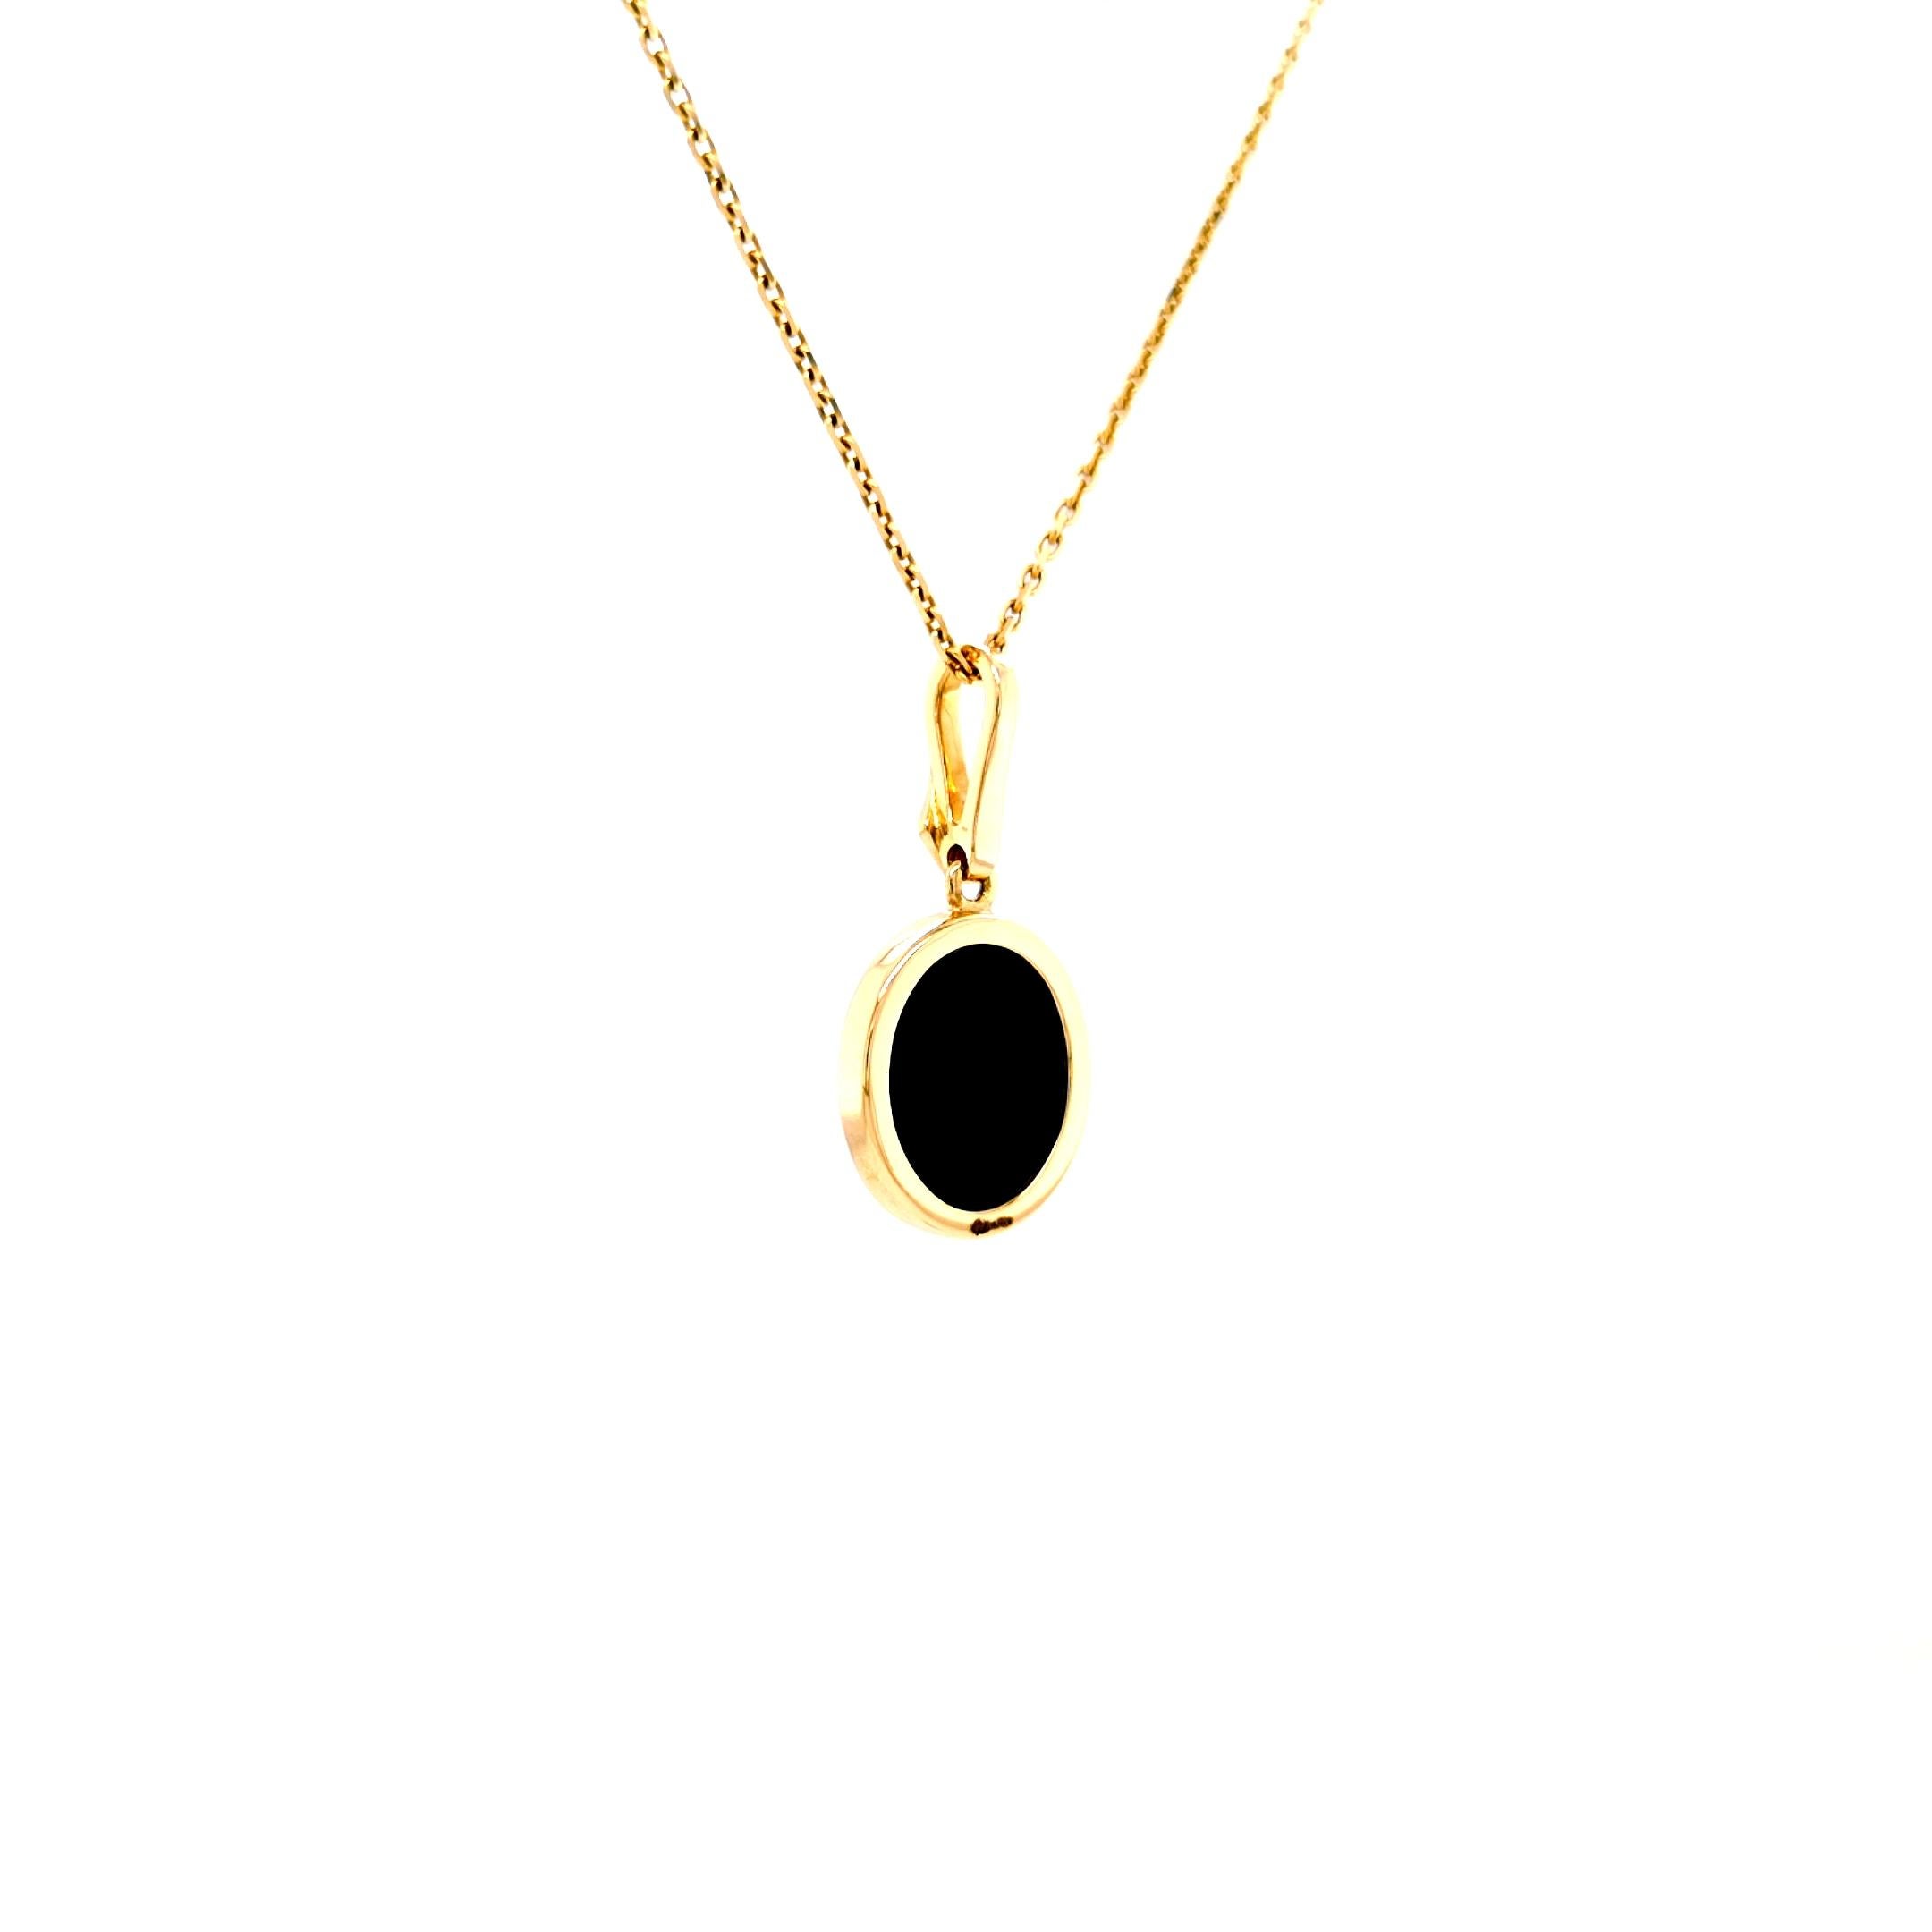 Women's or Men's Oval Pendant Necklace 18k Yellow Gold 1 Diamond 0.02 ct G VS Blue Layered Onyx For Sale